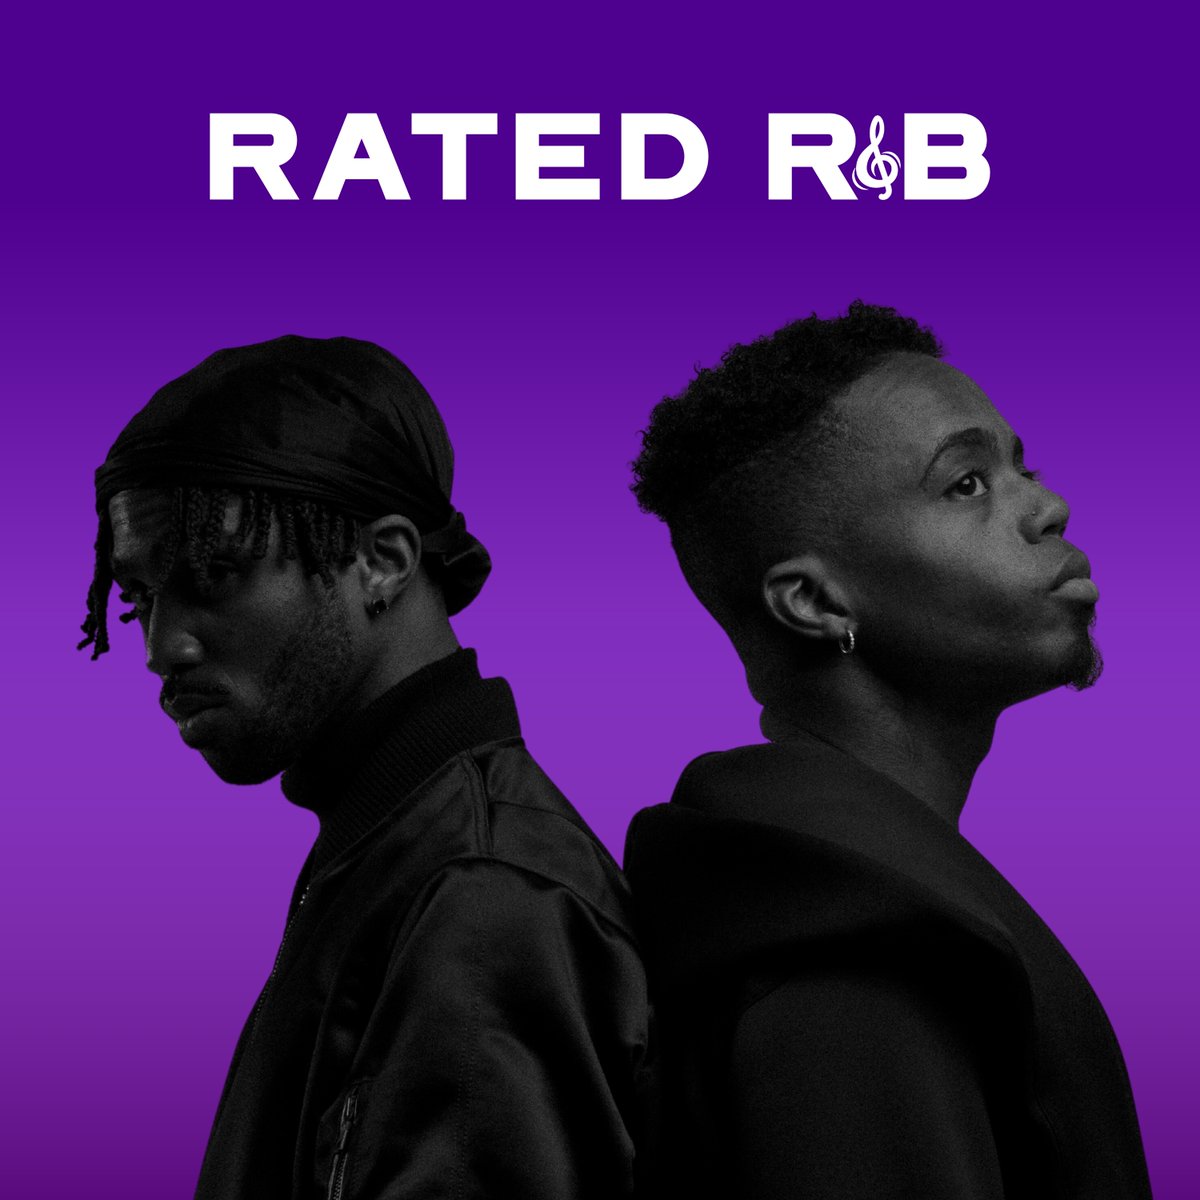 The RATED R&B playlist has been refreshed. 💜 Featuring music from @unofficialTHEY (cover), @KianaLede, @amakapls, @lovemoor__, @whoislavish, @ayyruffin, @Otis_Kane, @CedricBrazle, @moongak_, @ImJordanHawkins and more. Listen: ffm.to/ratedrnb